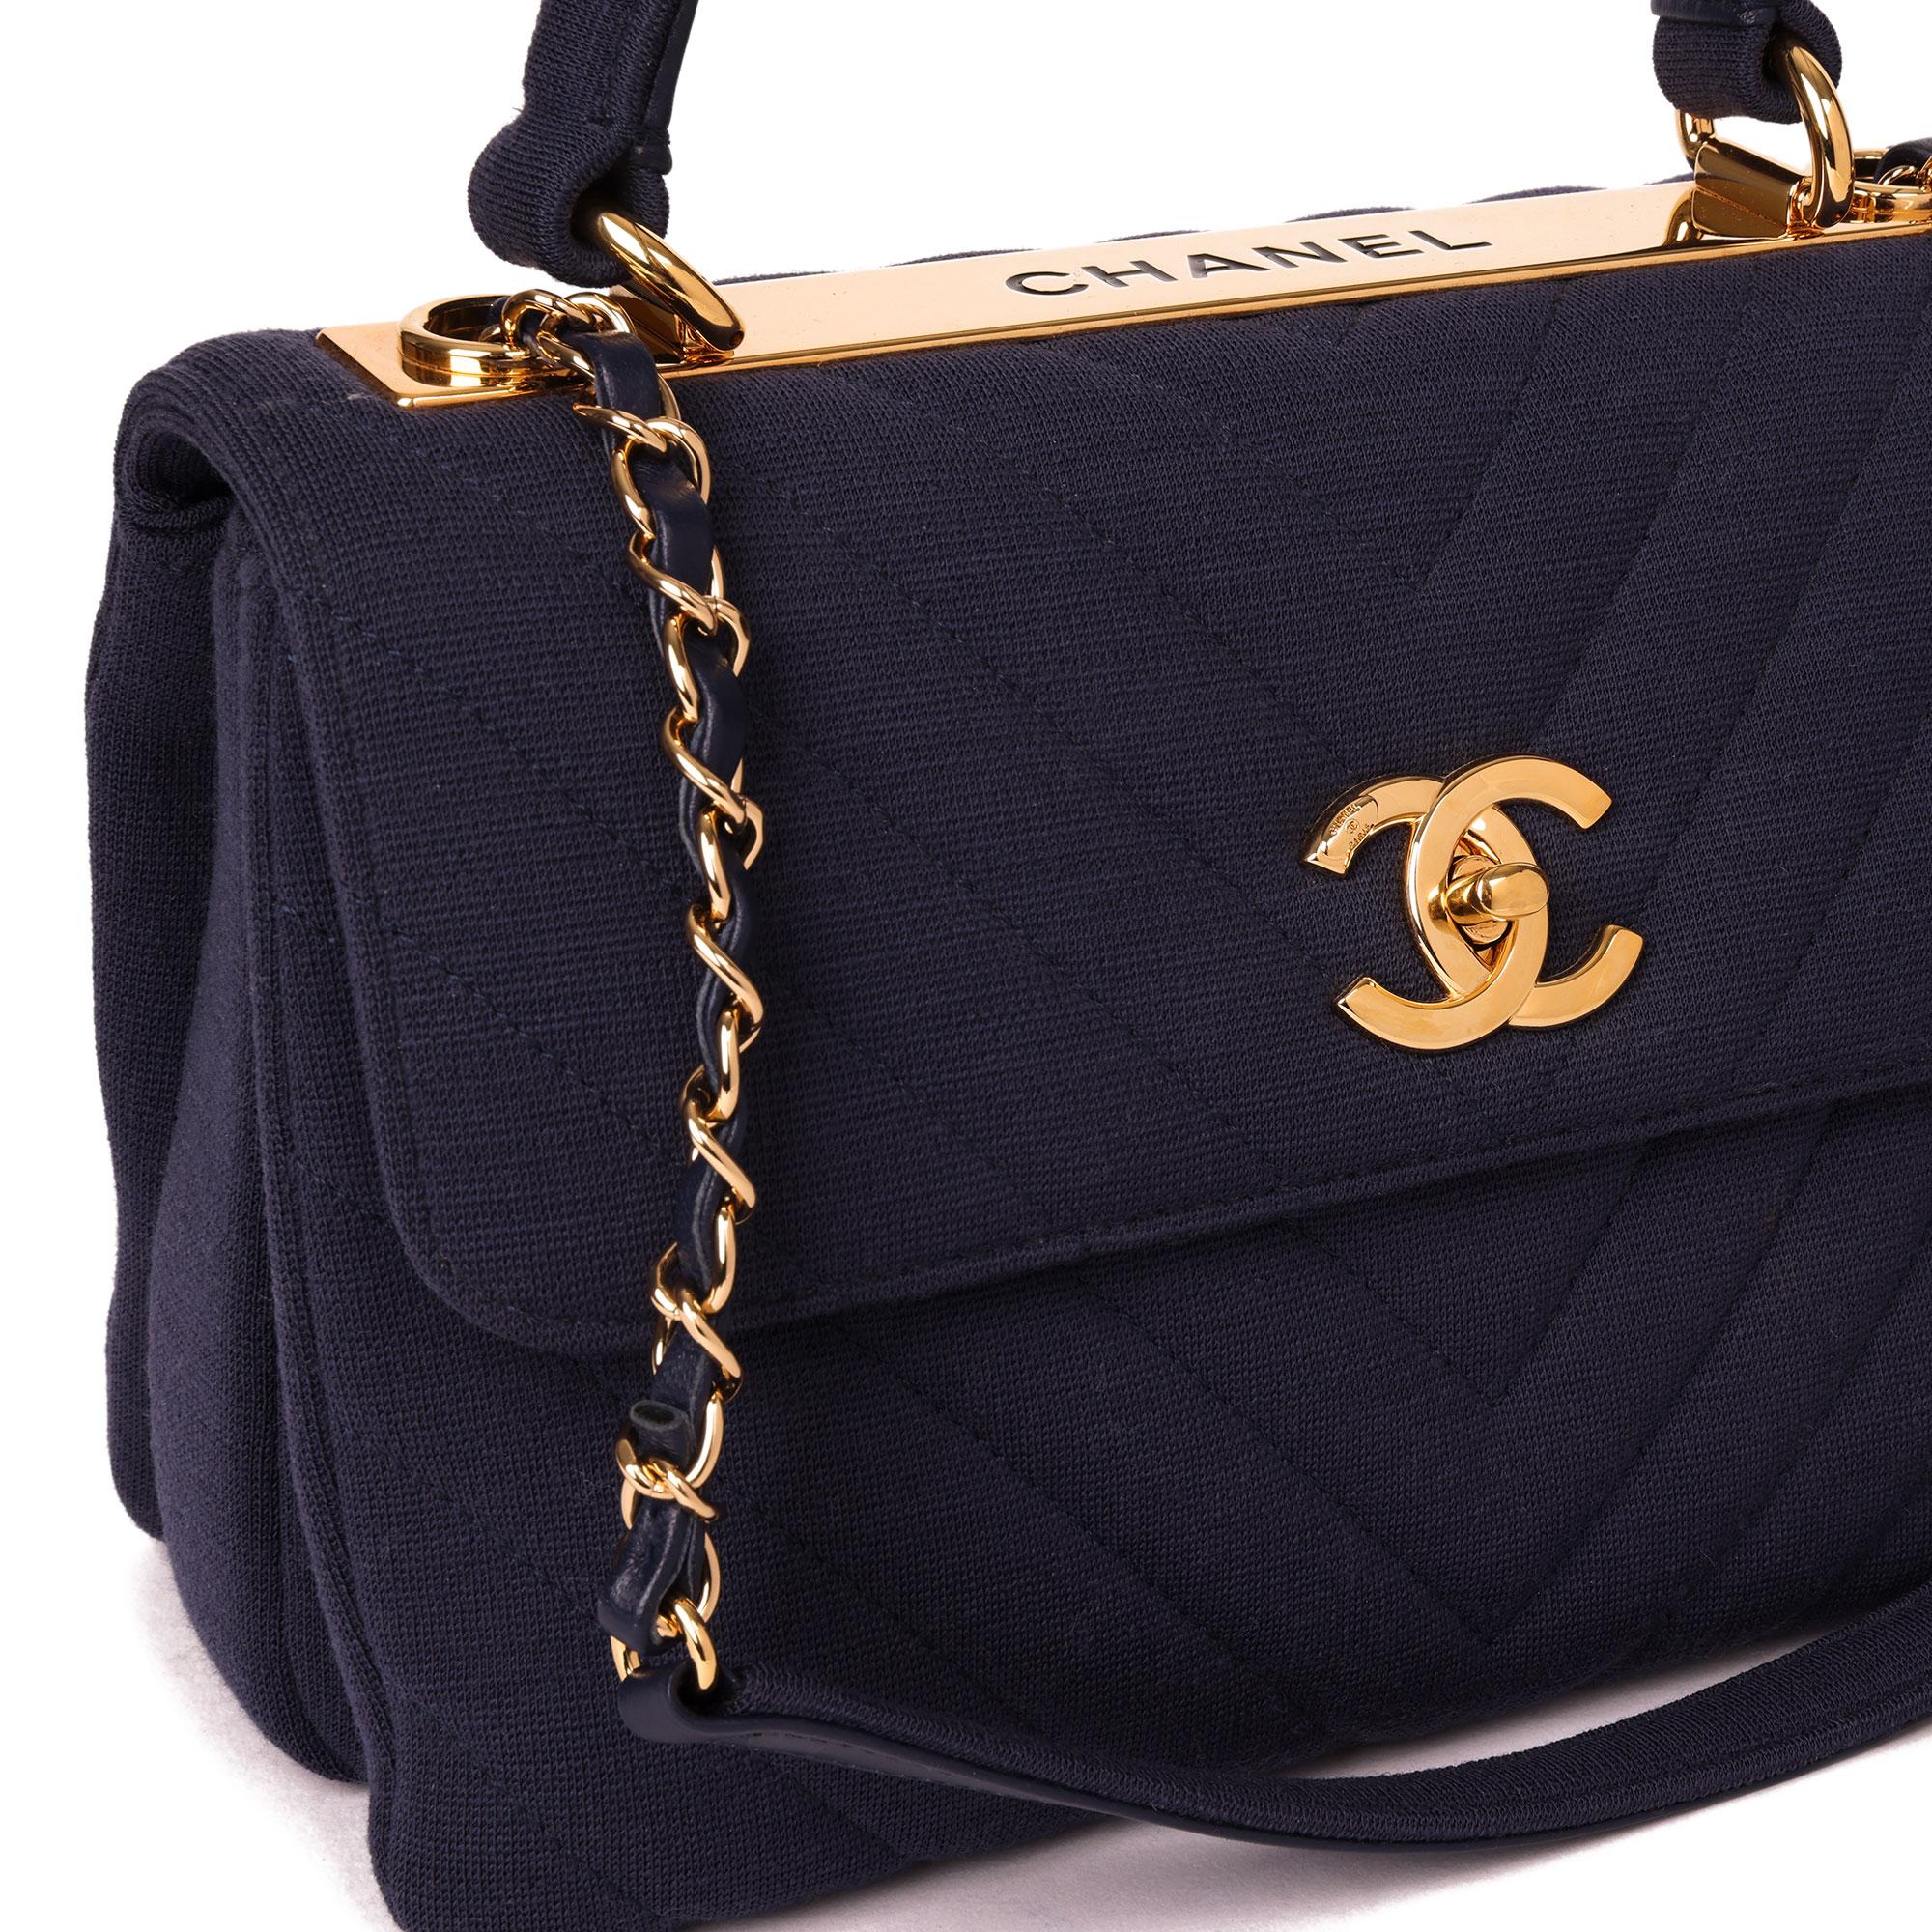 CHANEL
Navy Chevron Quilted Jersey Fabric Small Trendy CC Top Handle Flap Bag

Xupes Reference: HB4001
Serial Number: 26985763
Age (Circa): 2019
Accompanied By: Chanel Dust Bag, Box, Care Booklet, Authenticity Card
Authenticity Details: Serial